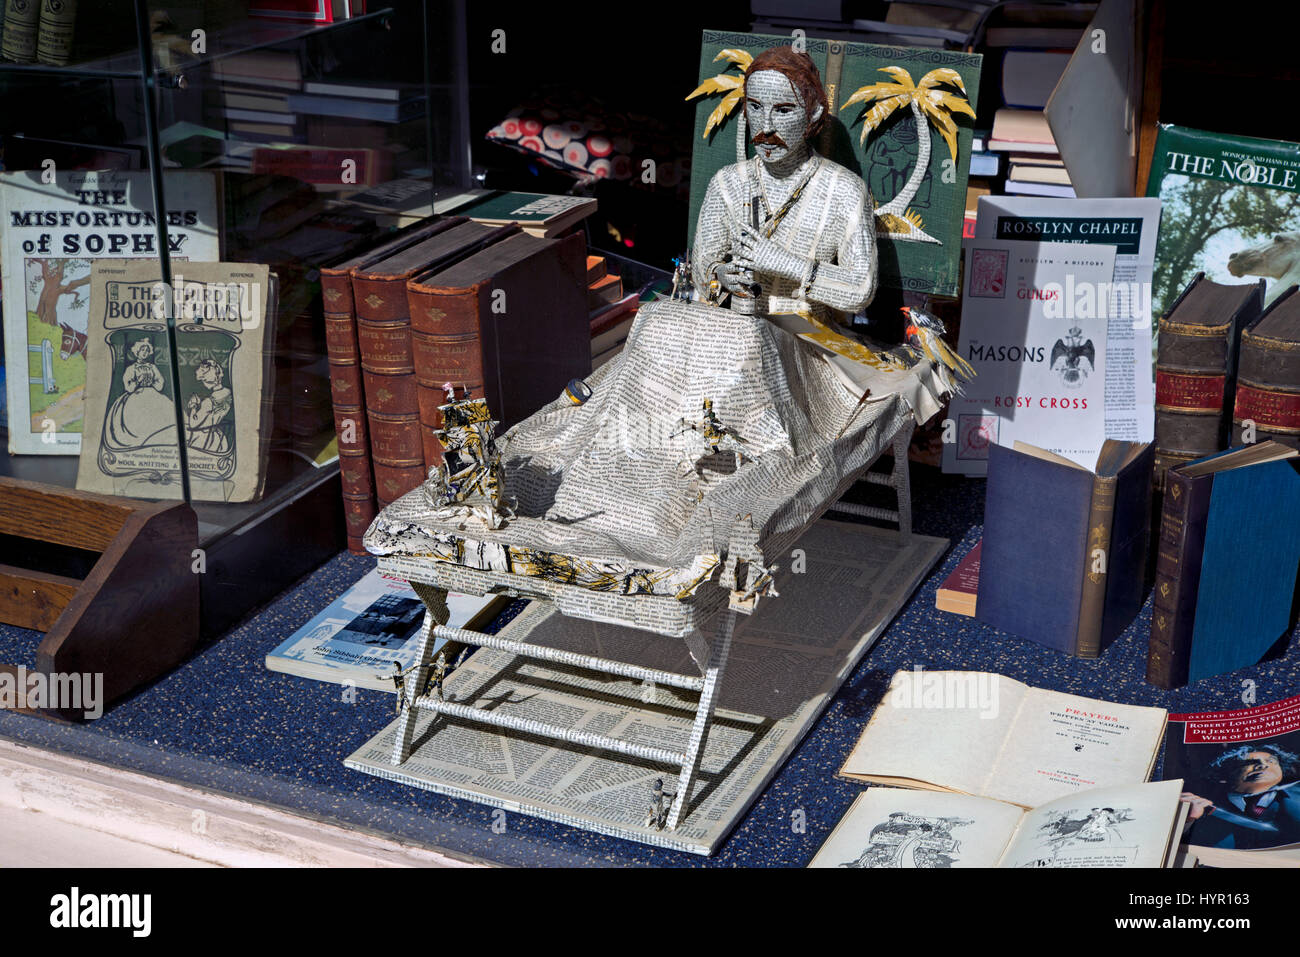 A model of Robert Louis Stevenson made from the pages of a book in the window of a secondhand bookshop in Edinburgh, Scotland, UK. Stock Photo